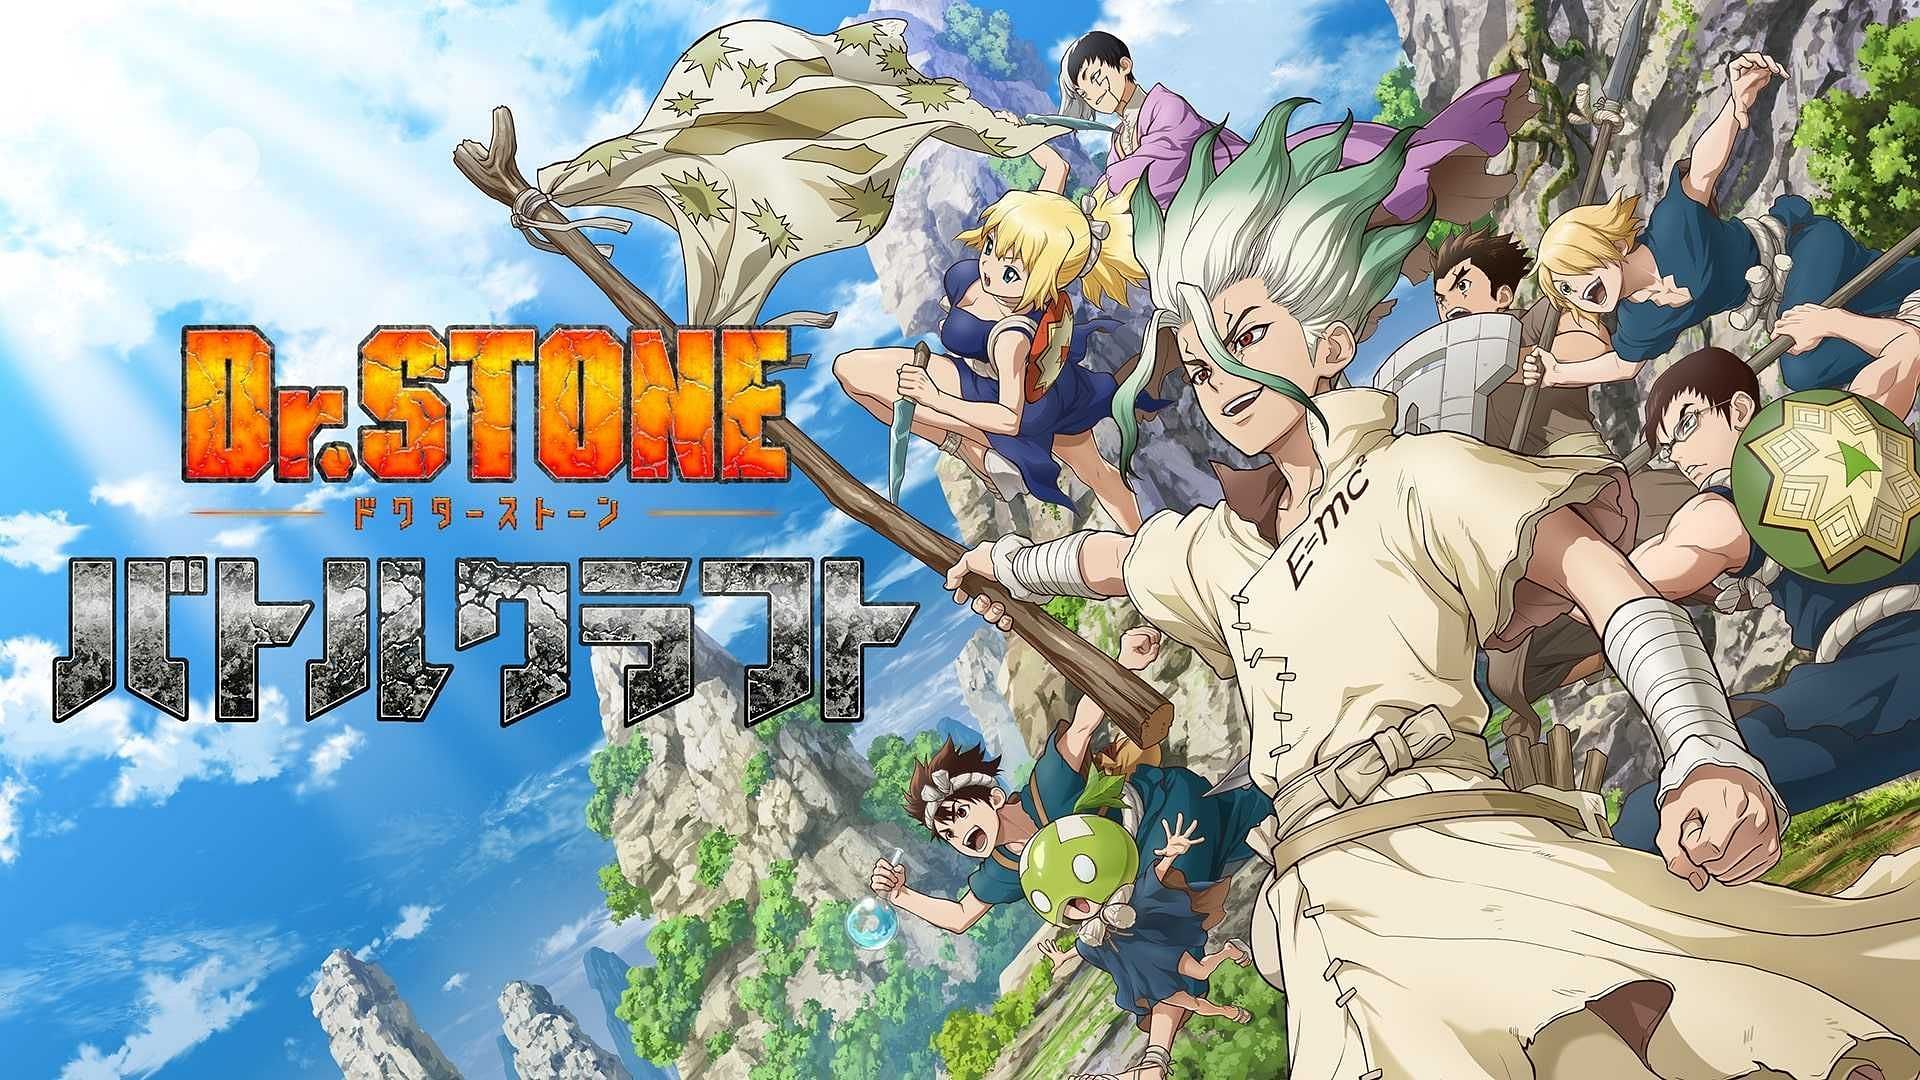 Dr. Stone Chapter 232 raw scans: Safely back to Earth, Senku's final invention, and more